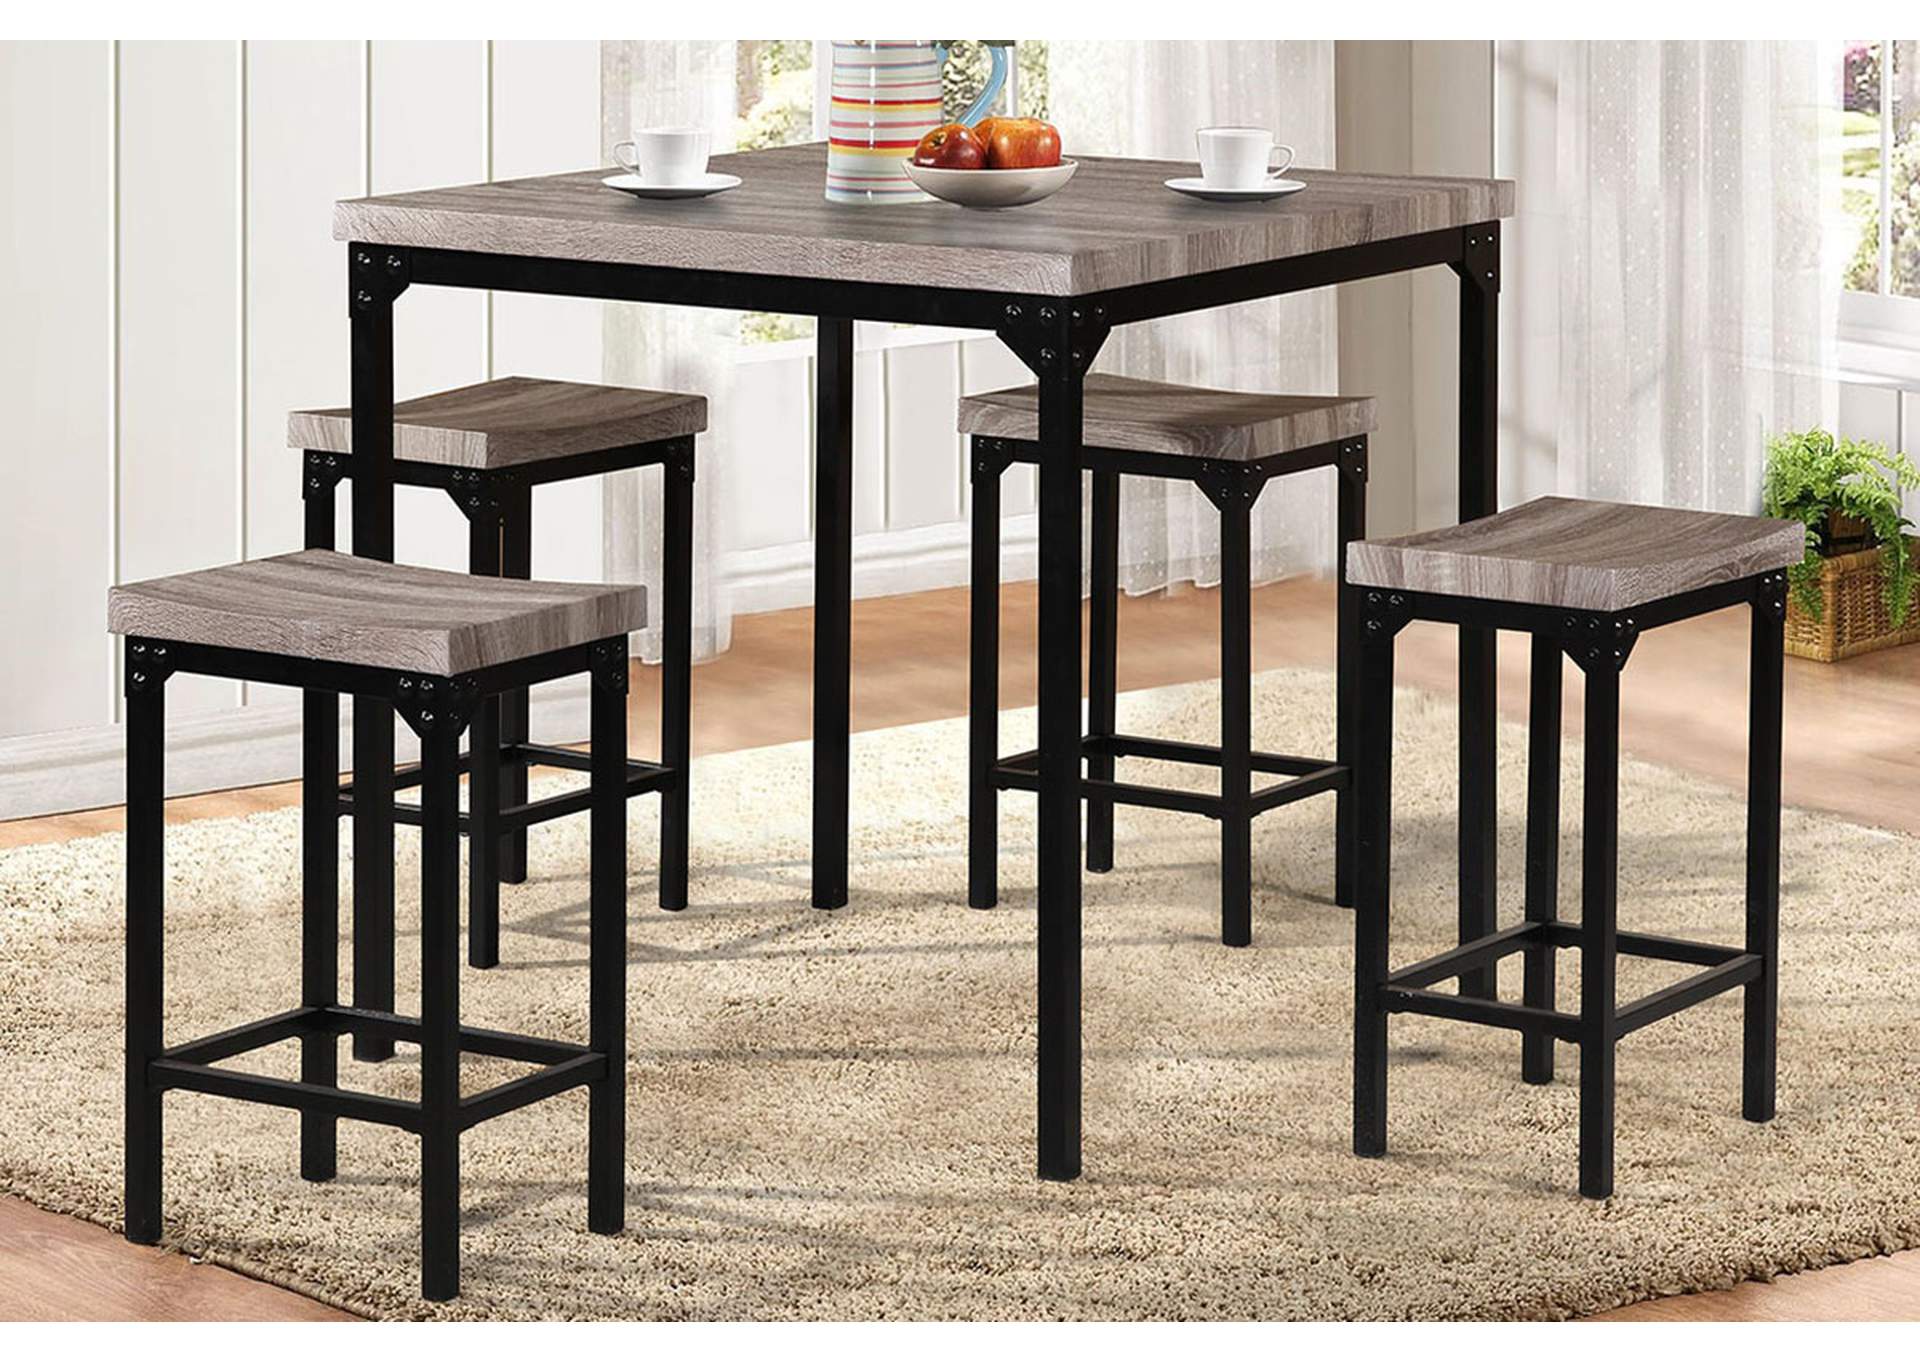 5 Piece Counter Height Dining Set,Poundex